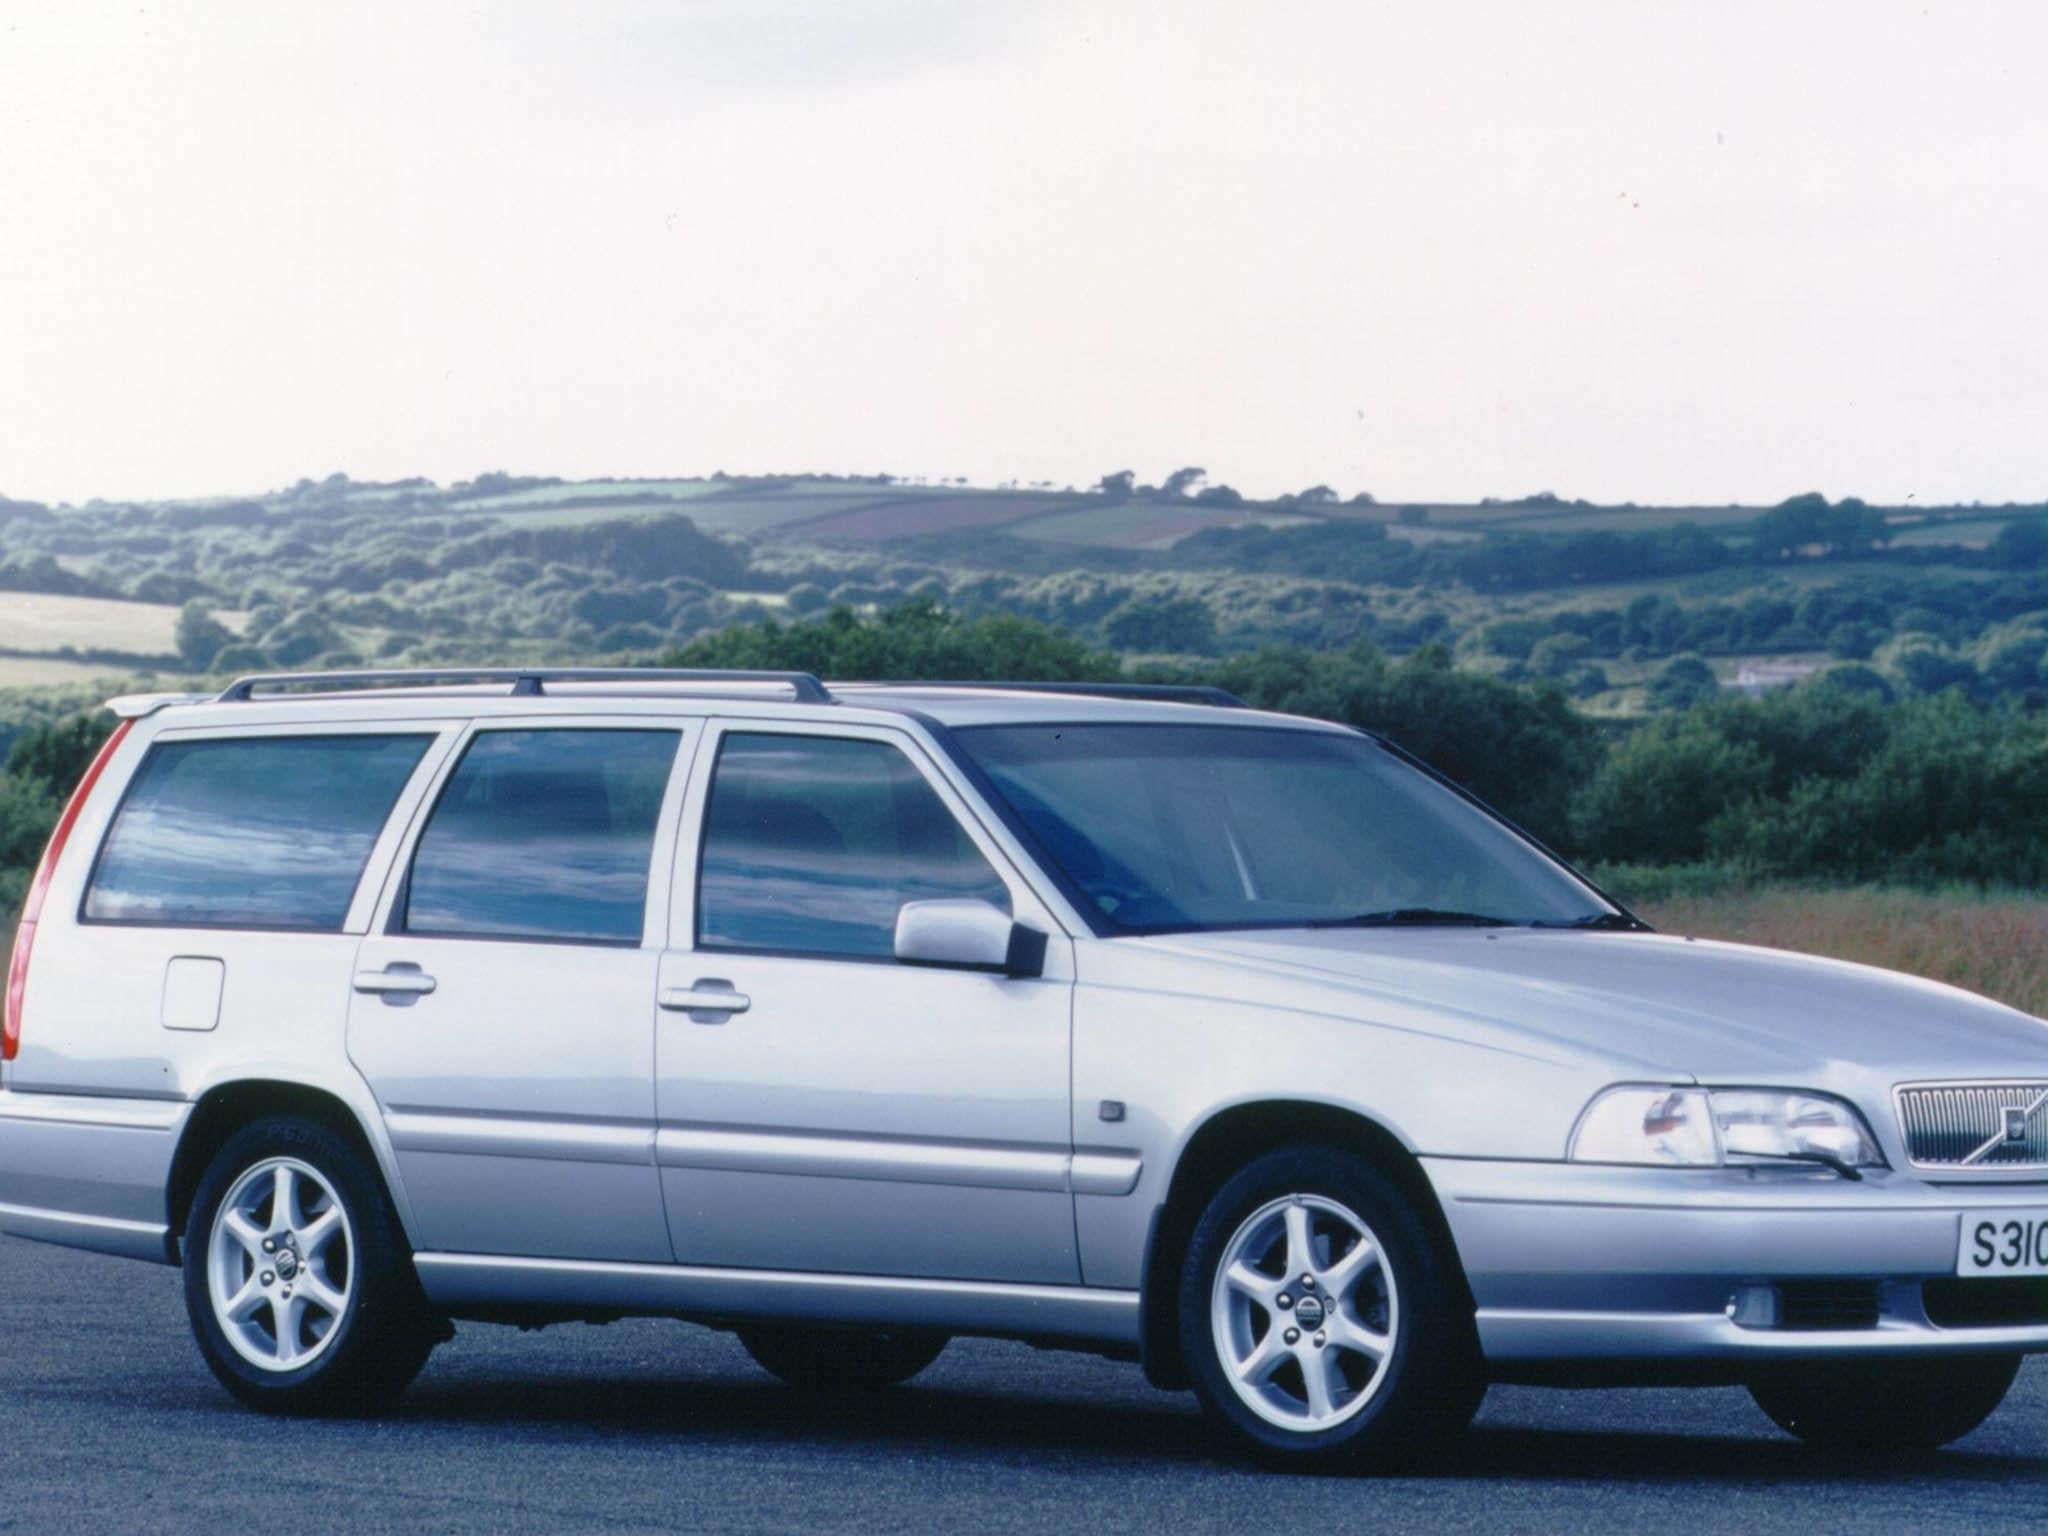 Volvo V70s are known for their hard wearing qualities